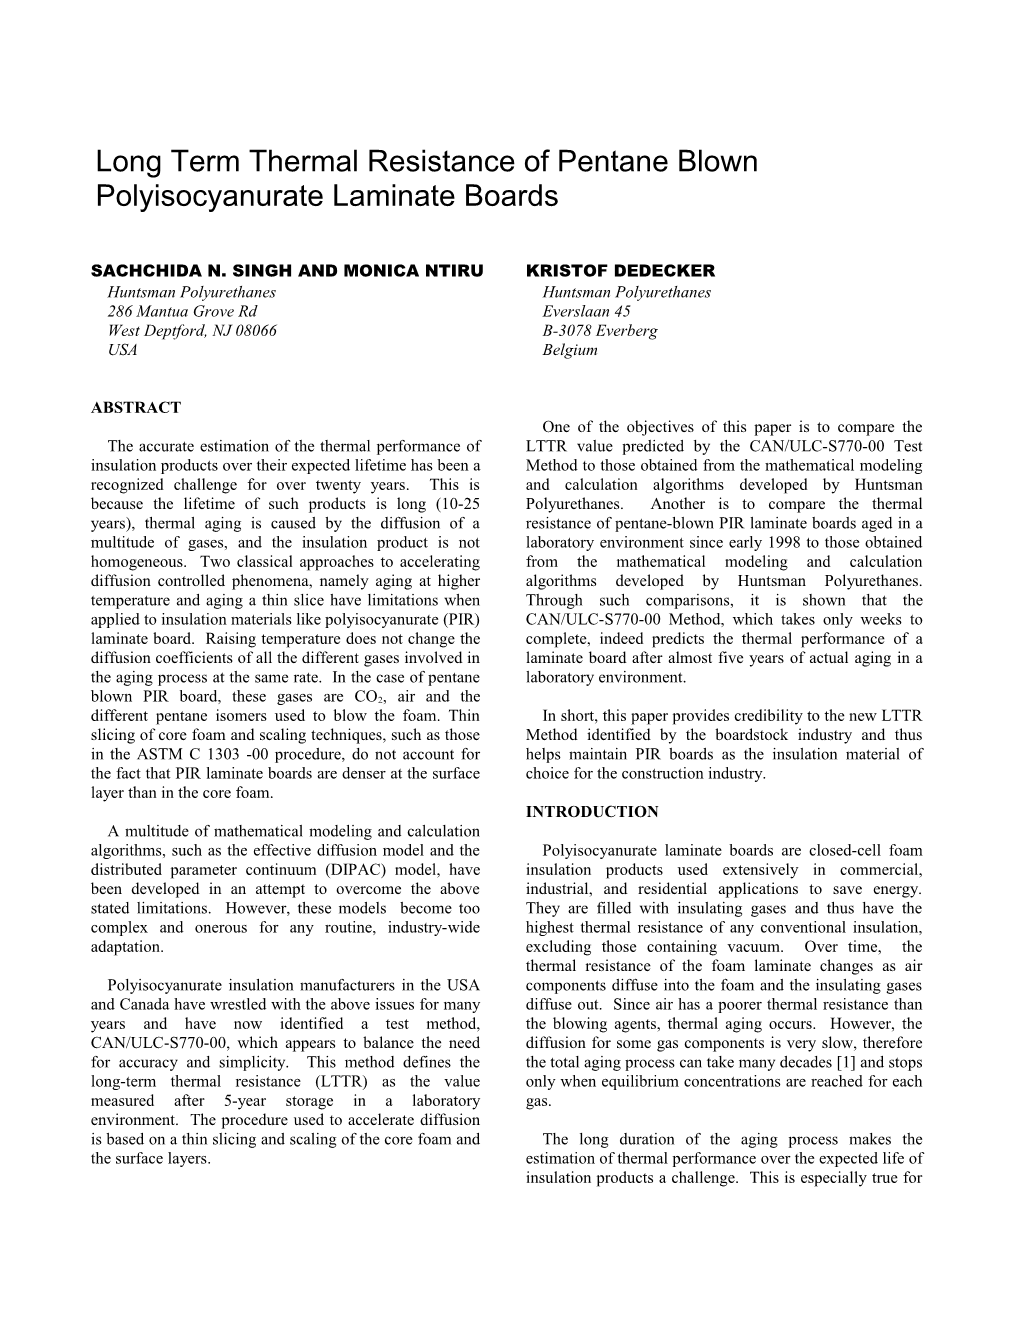 Long Term Thermal Resistance of Pentane Blown Polyisocyanurate Laminate Boards